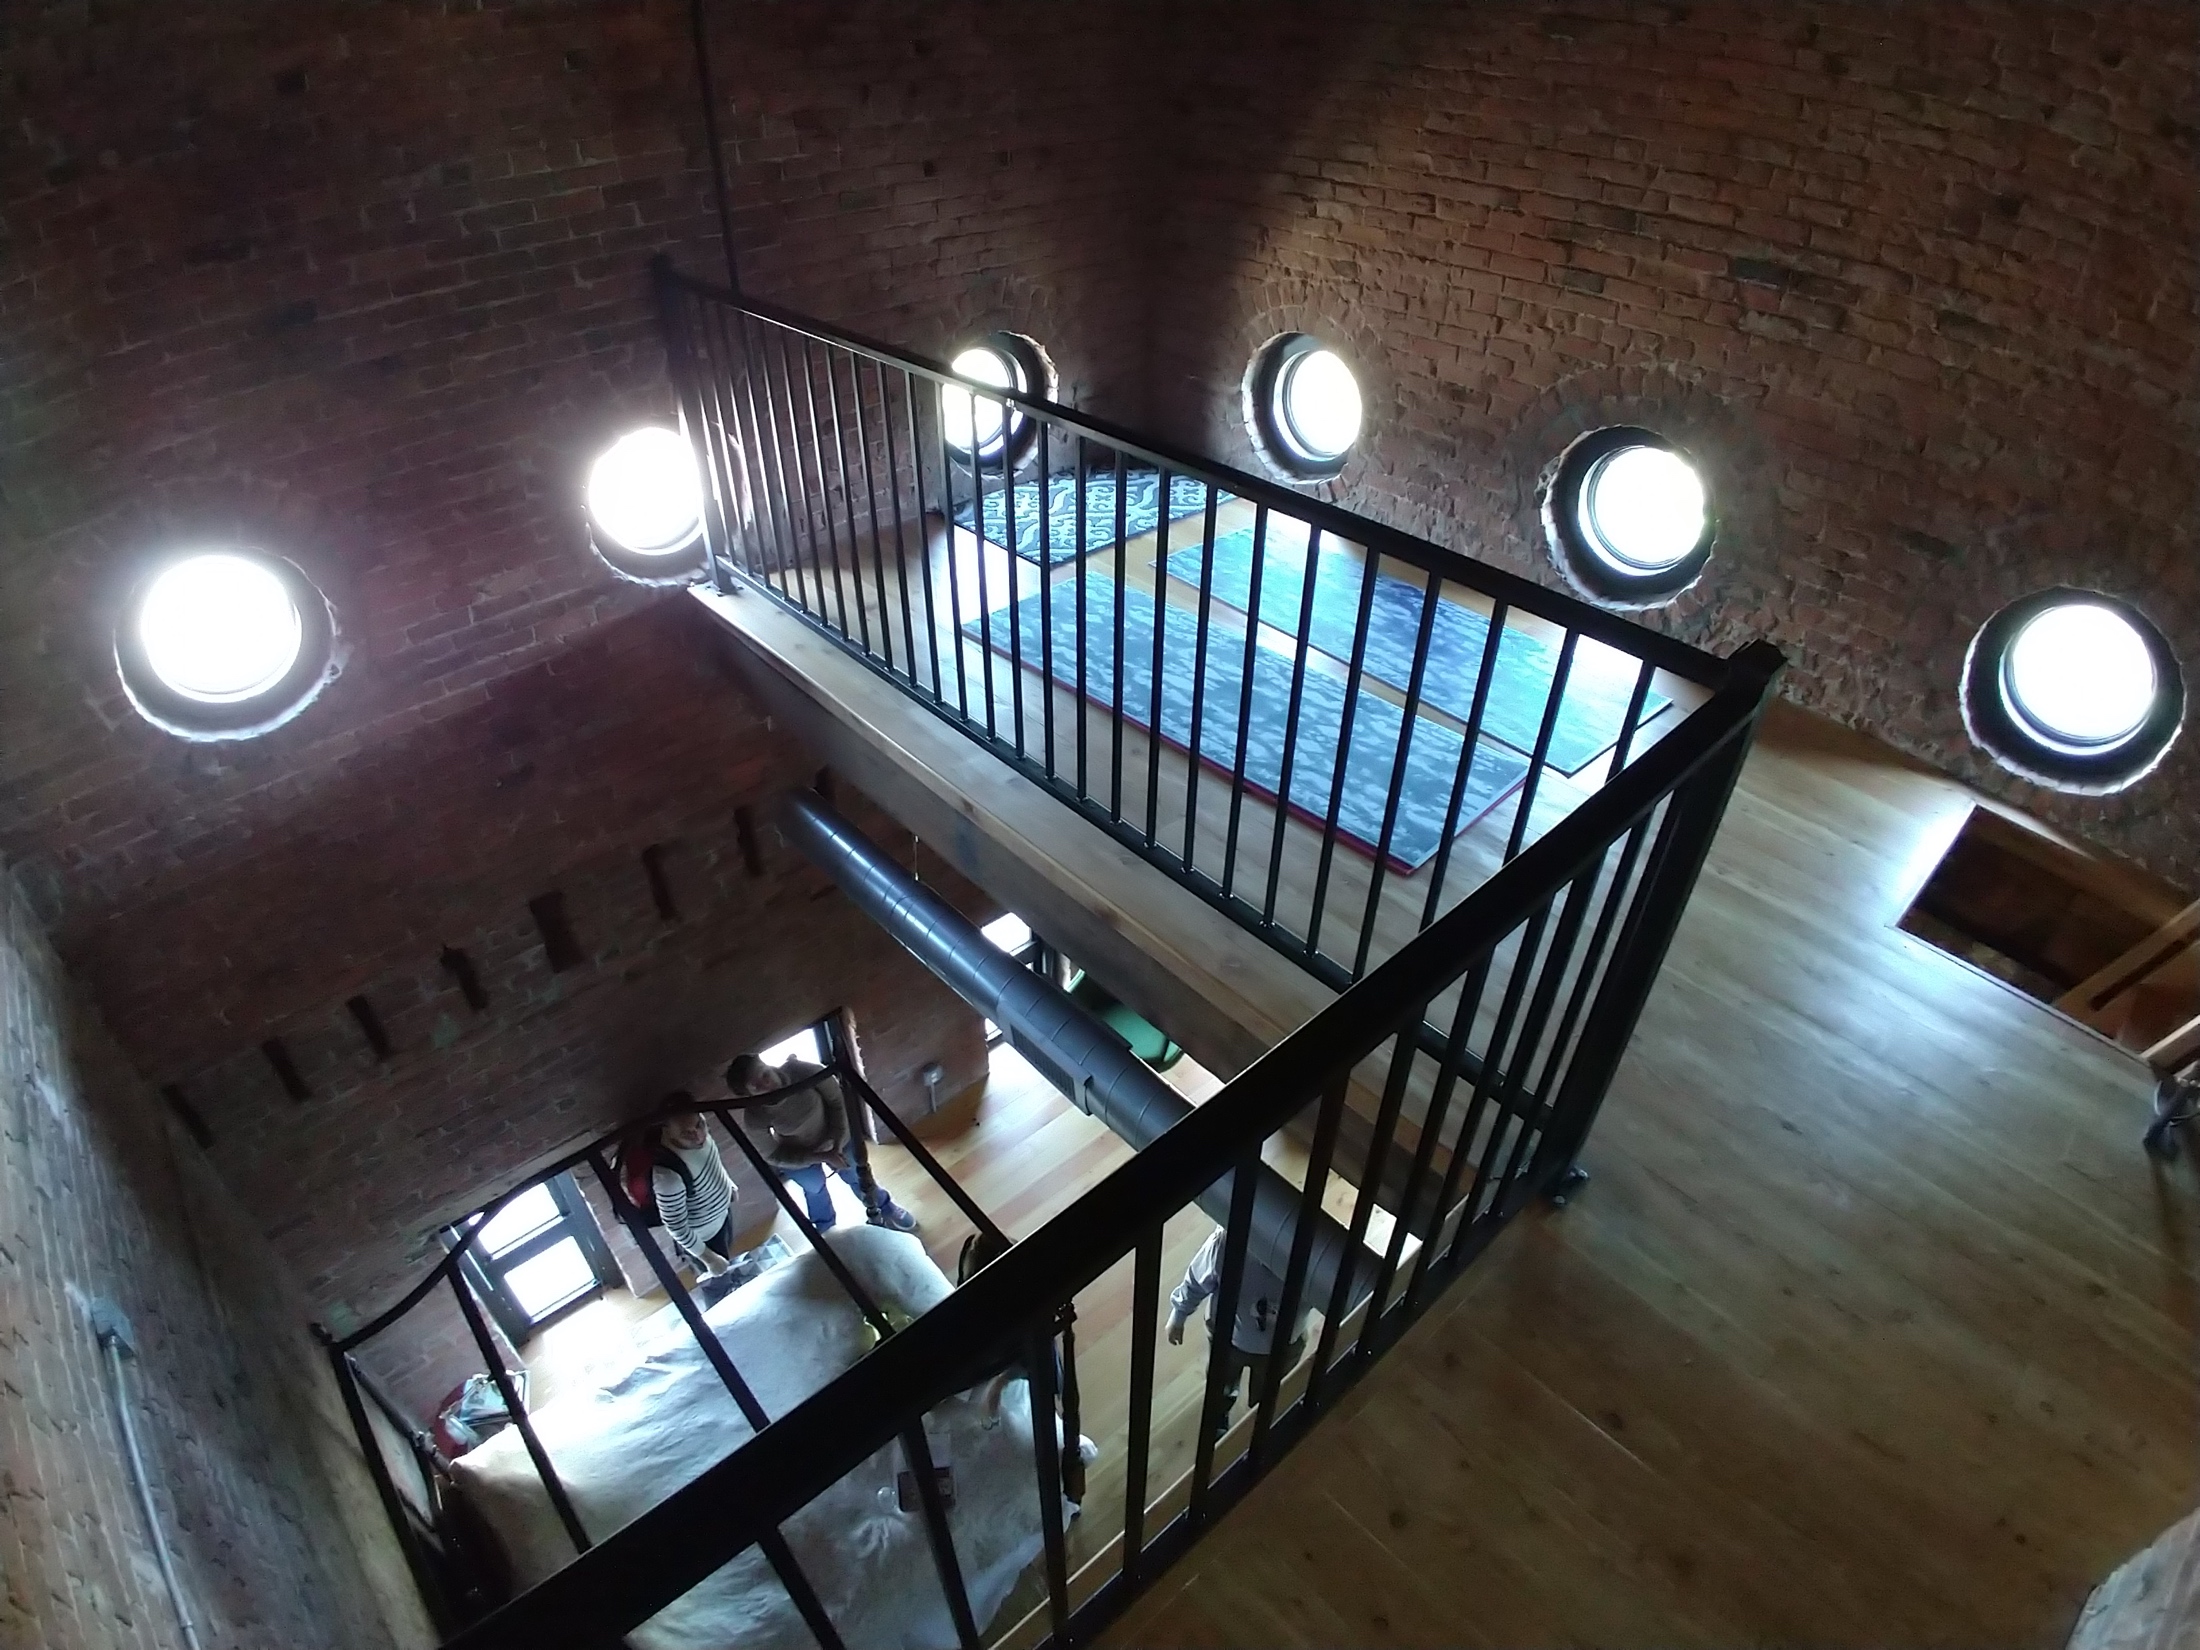  30 foot ceilings and a loft inside the steeple of this former Victorian church building Photo by Jessica Jennings 